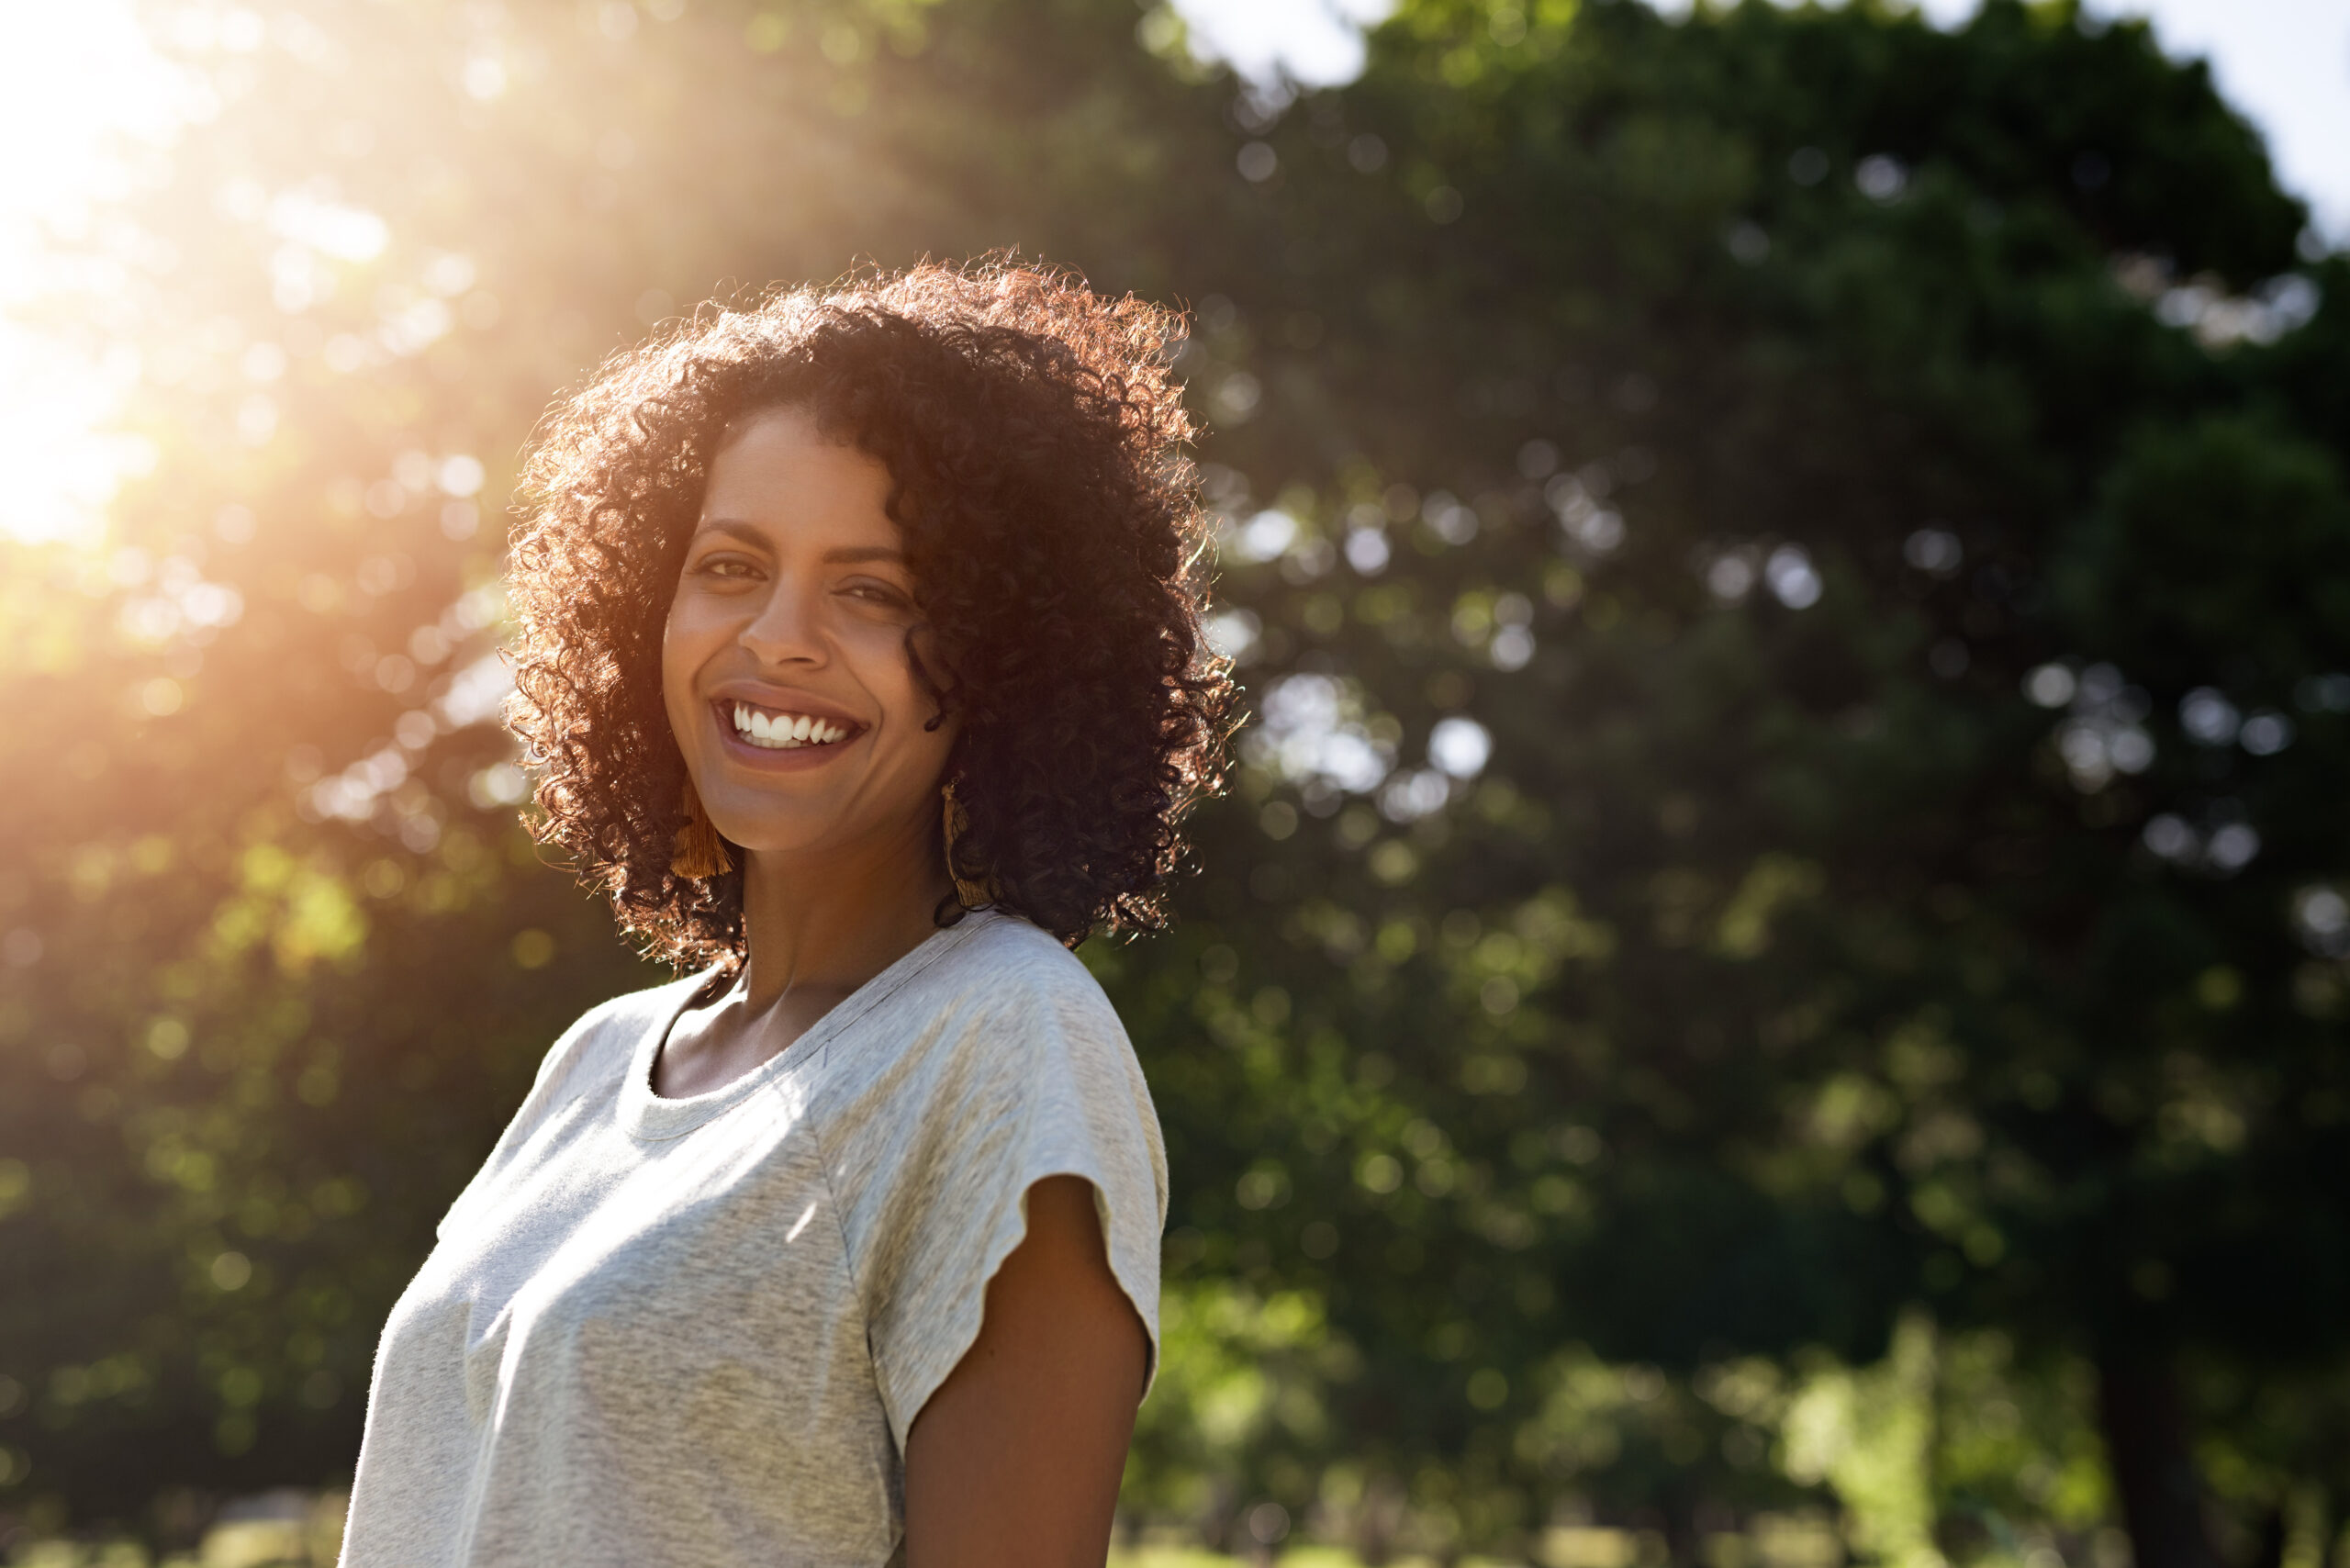 Portrait of a young woman with curly hair smiling while standing outside in a park on a sunny summer afternoon